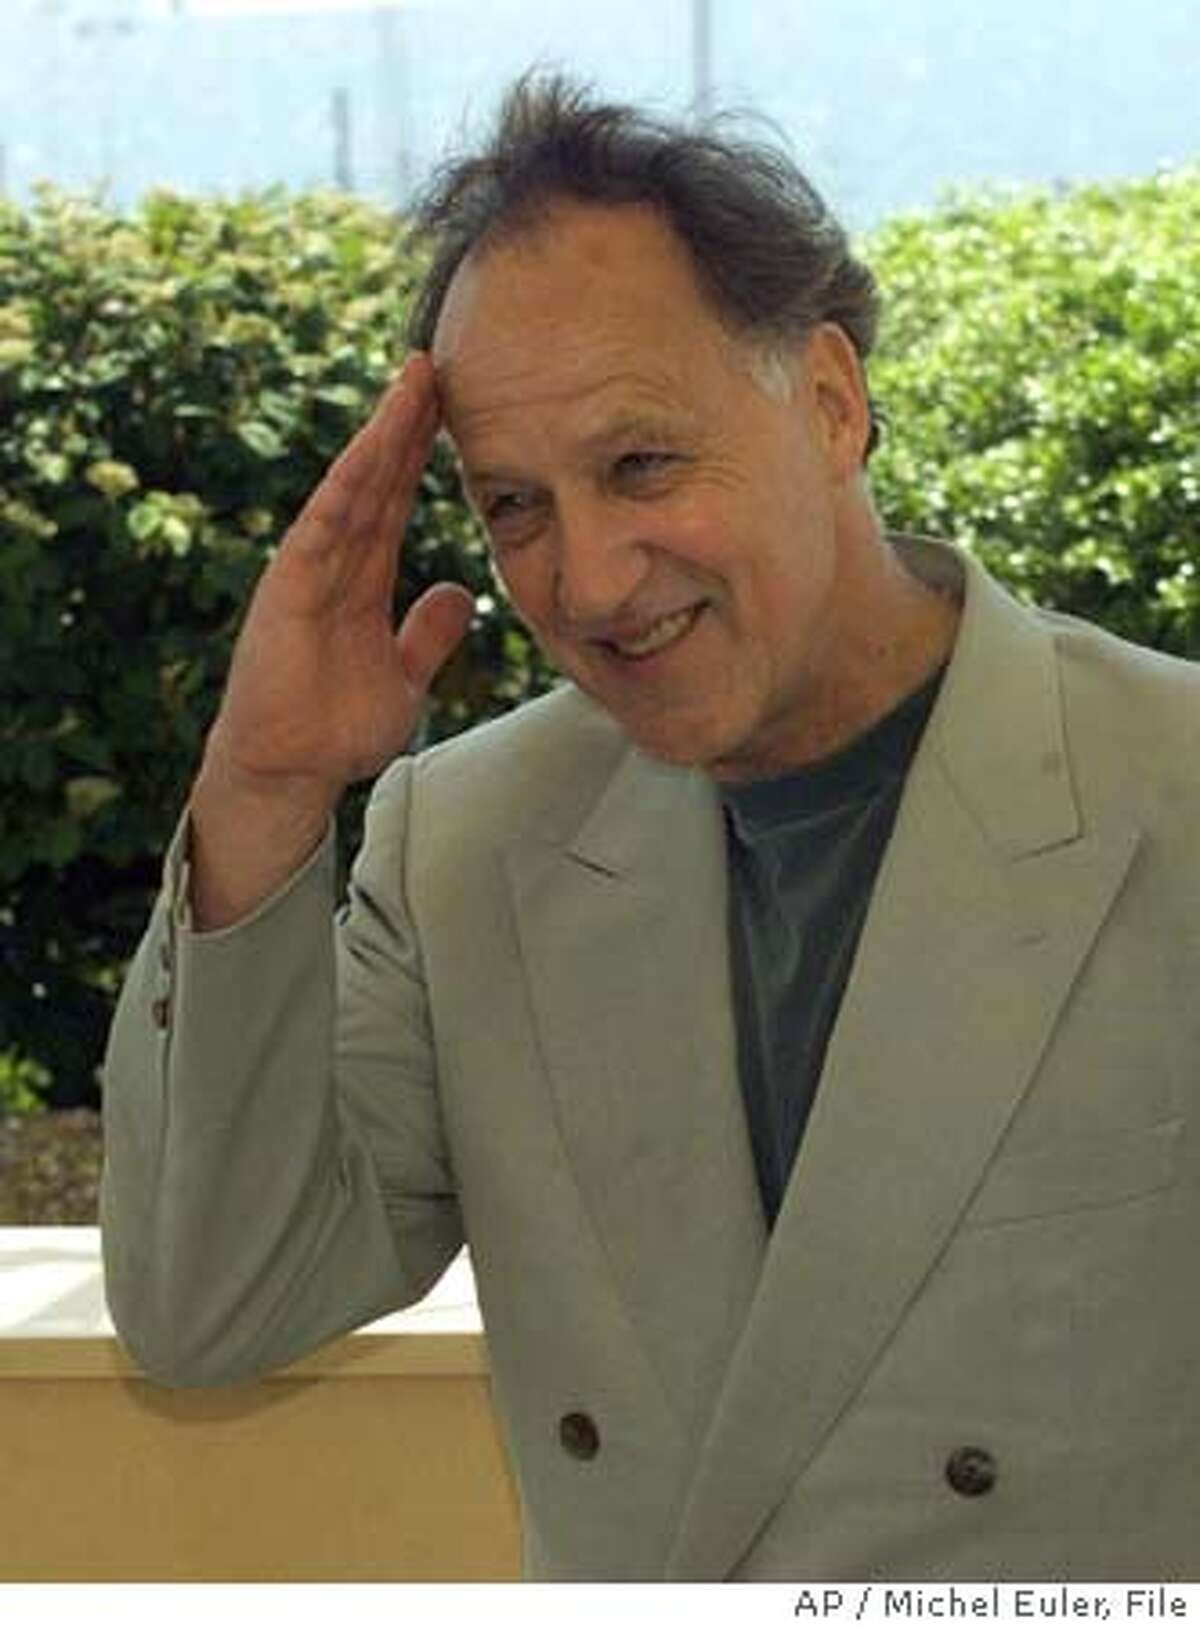 HERZOG-C-12AUG02-DD-AP --- German director Werner Herzog gives a military salute to photographers during a photocall for this film "Mein Liebster Feind" (My Dear Enemy), out of competition, at the 52nd Cannes Film Festival in Cannes, France, Sunday, May 16, 1999.(AP PHOTO/Michel Euler) CAT